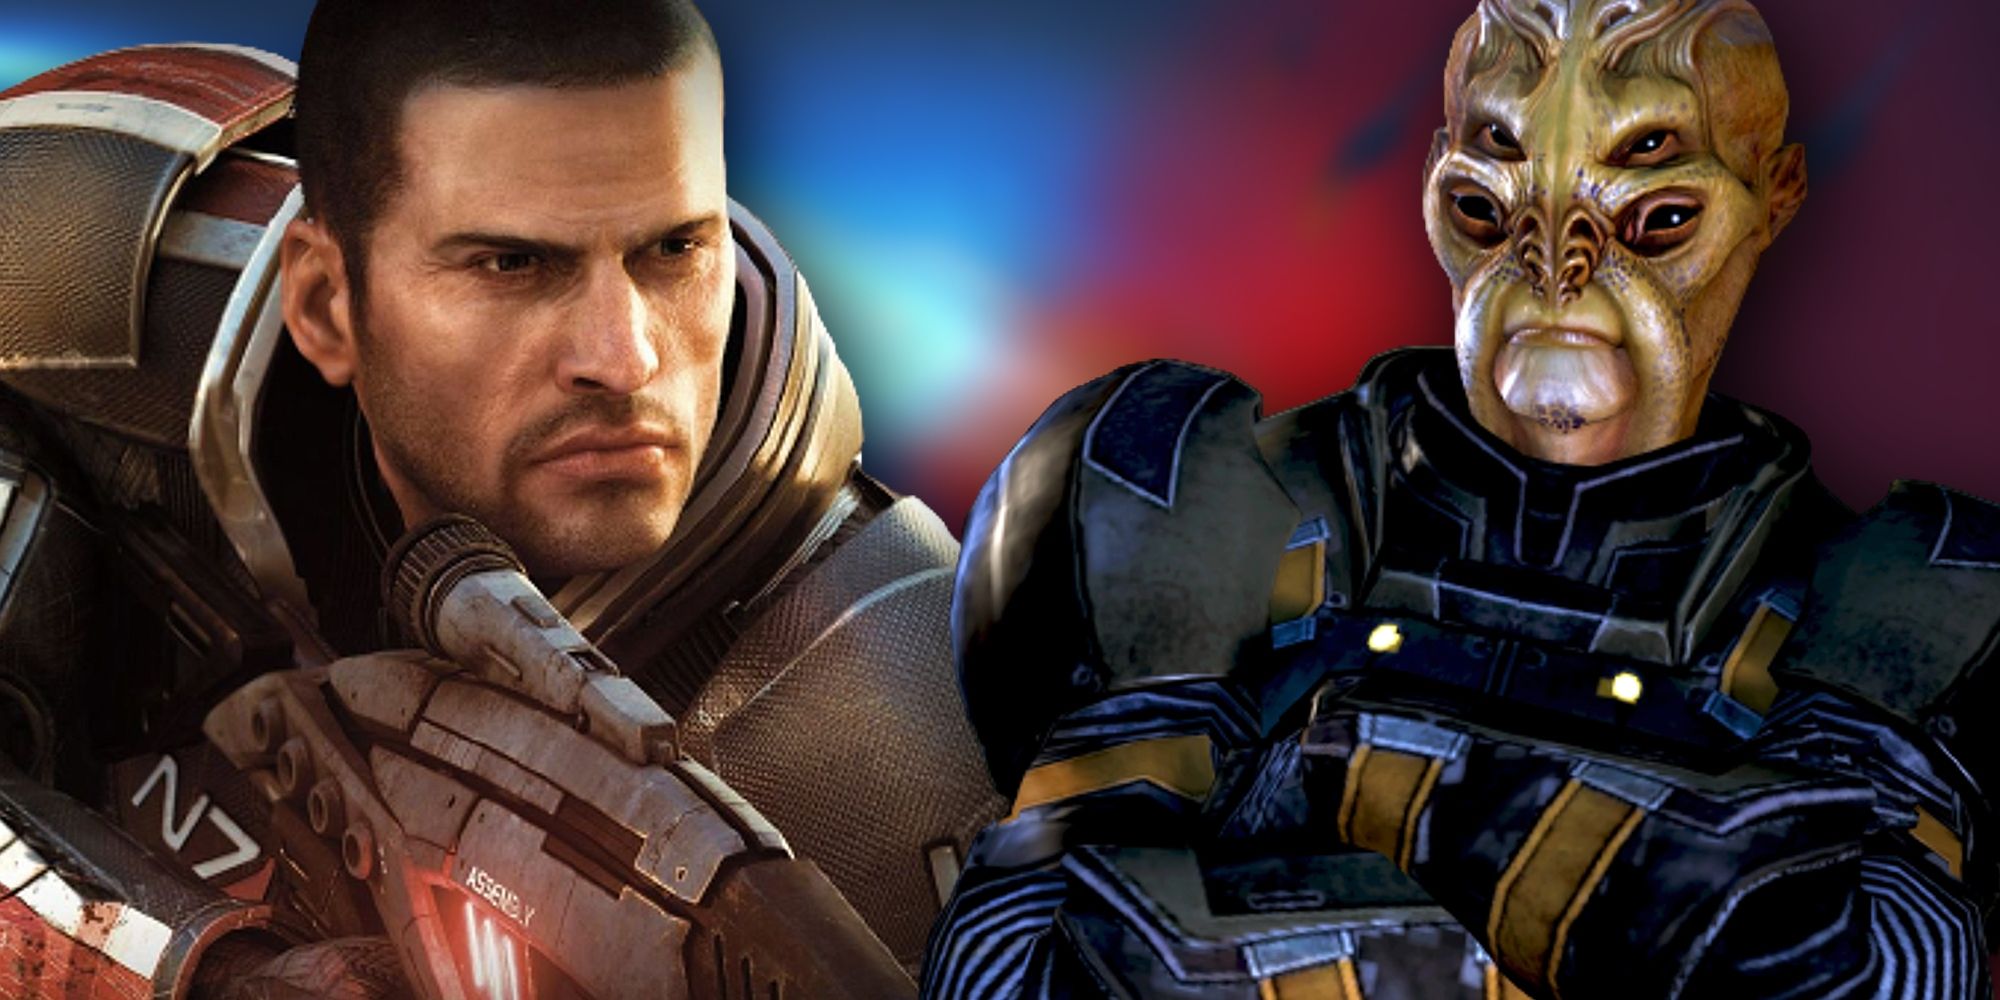 Image of Mass Effect's Commander Shepard squaring off against a Batarian with crossed arms.